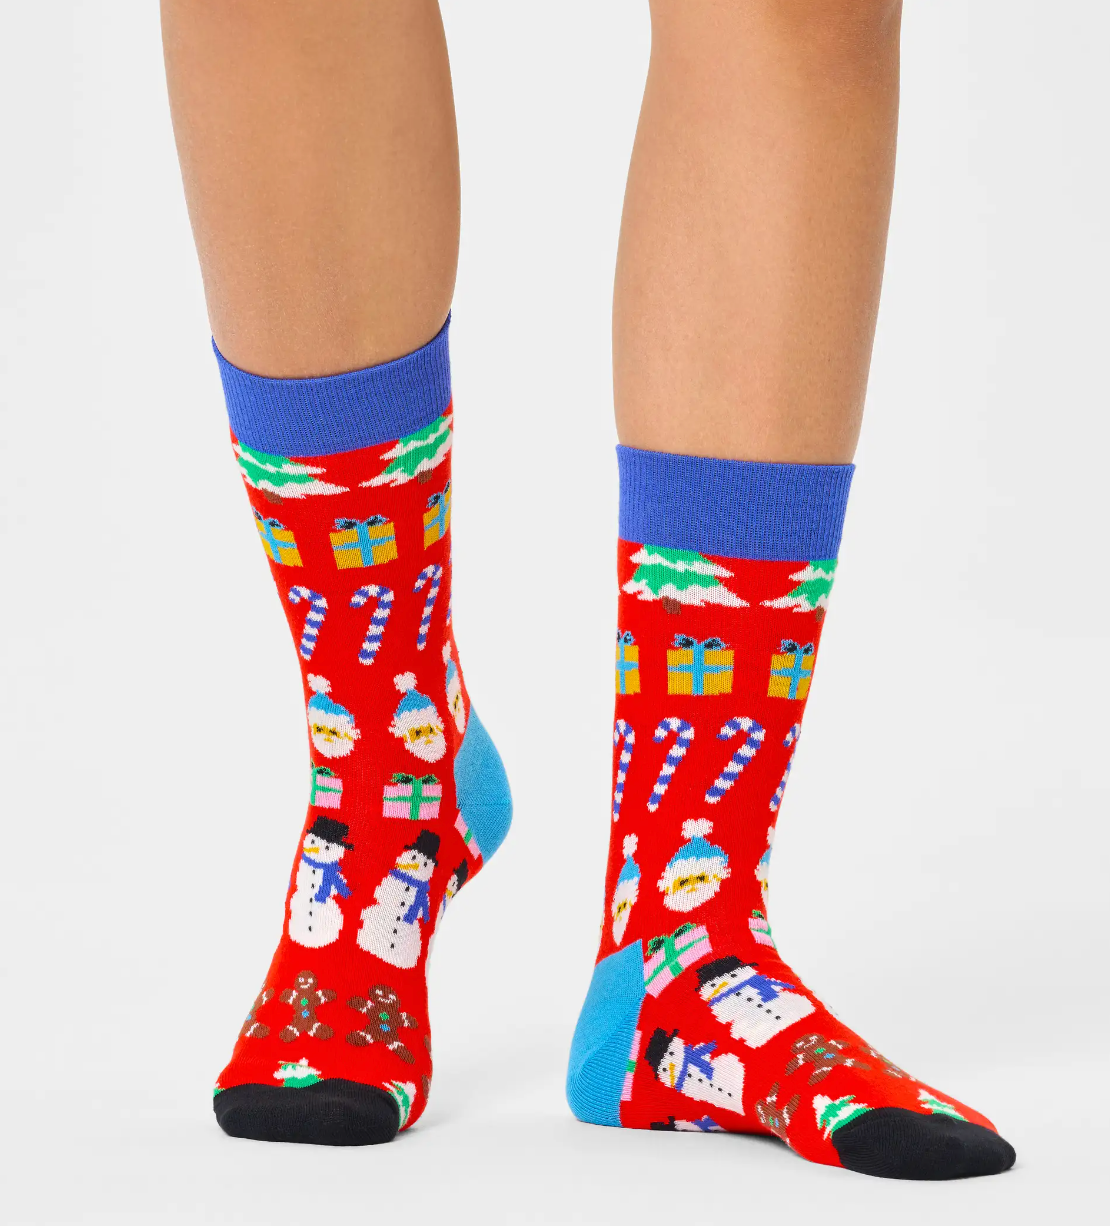 Happy Sock All I Want For Christmas Sock - Red crew length Christmas themed ankle socks with a fairisle style pattern of stripes of candy canes, Santas, presents, snow men, ginger bread men.